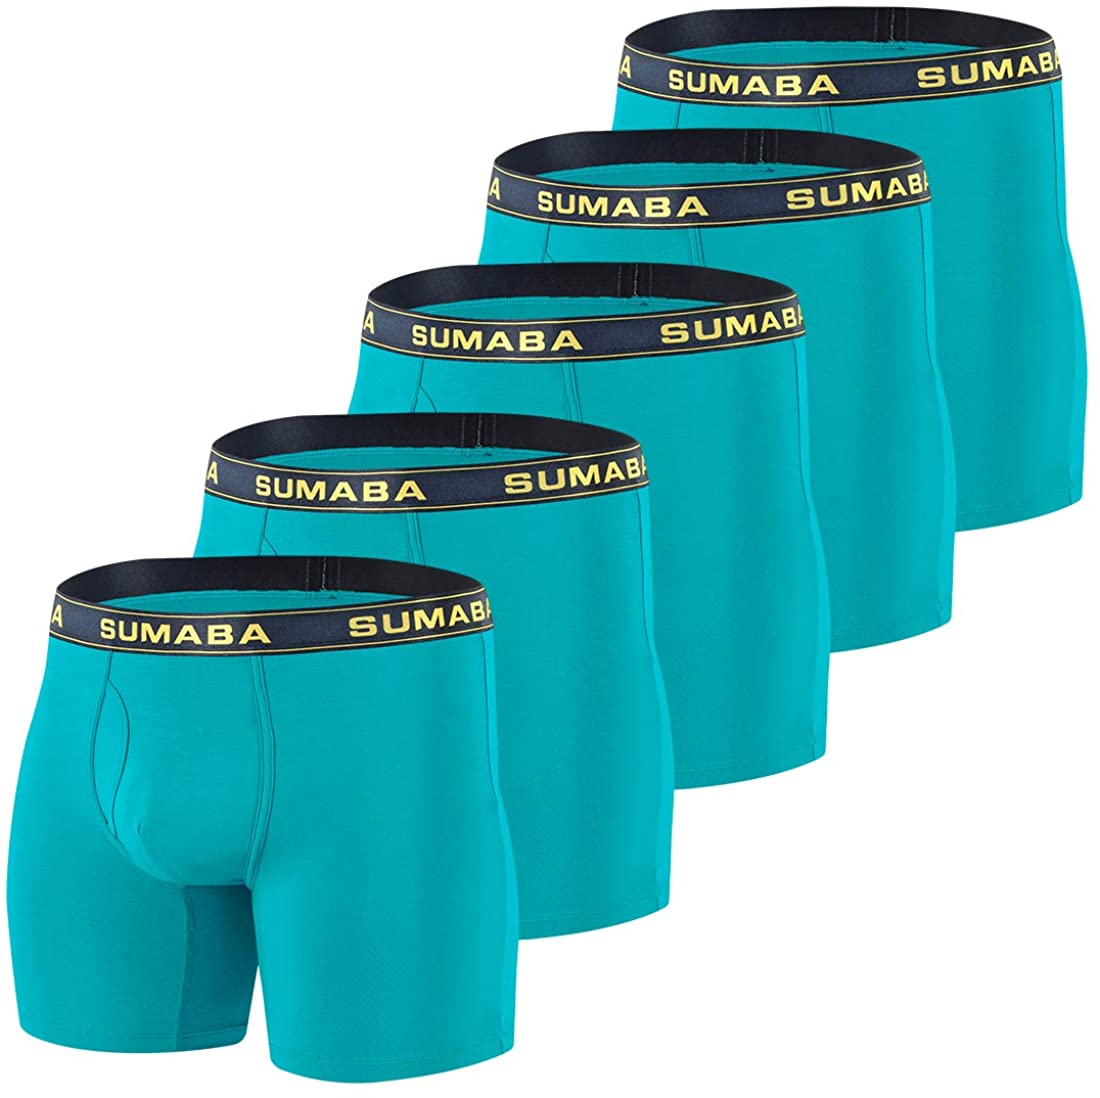 SUMABA Long Leg Men Underwear Boxer Briefs Fly with Pouch No Ride Up Bamboo Underpants for Men Breathable